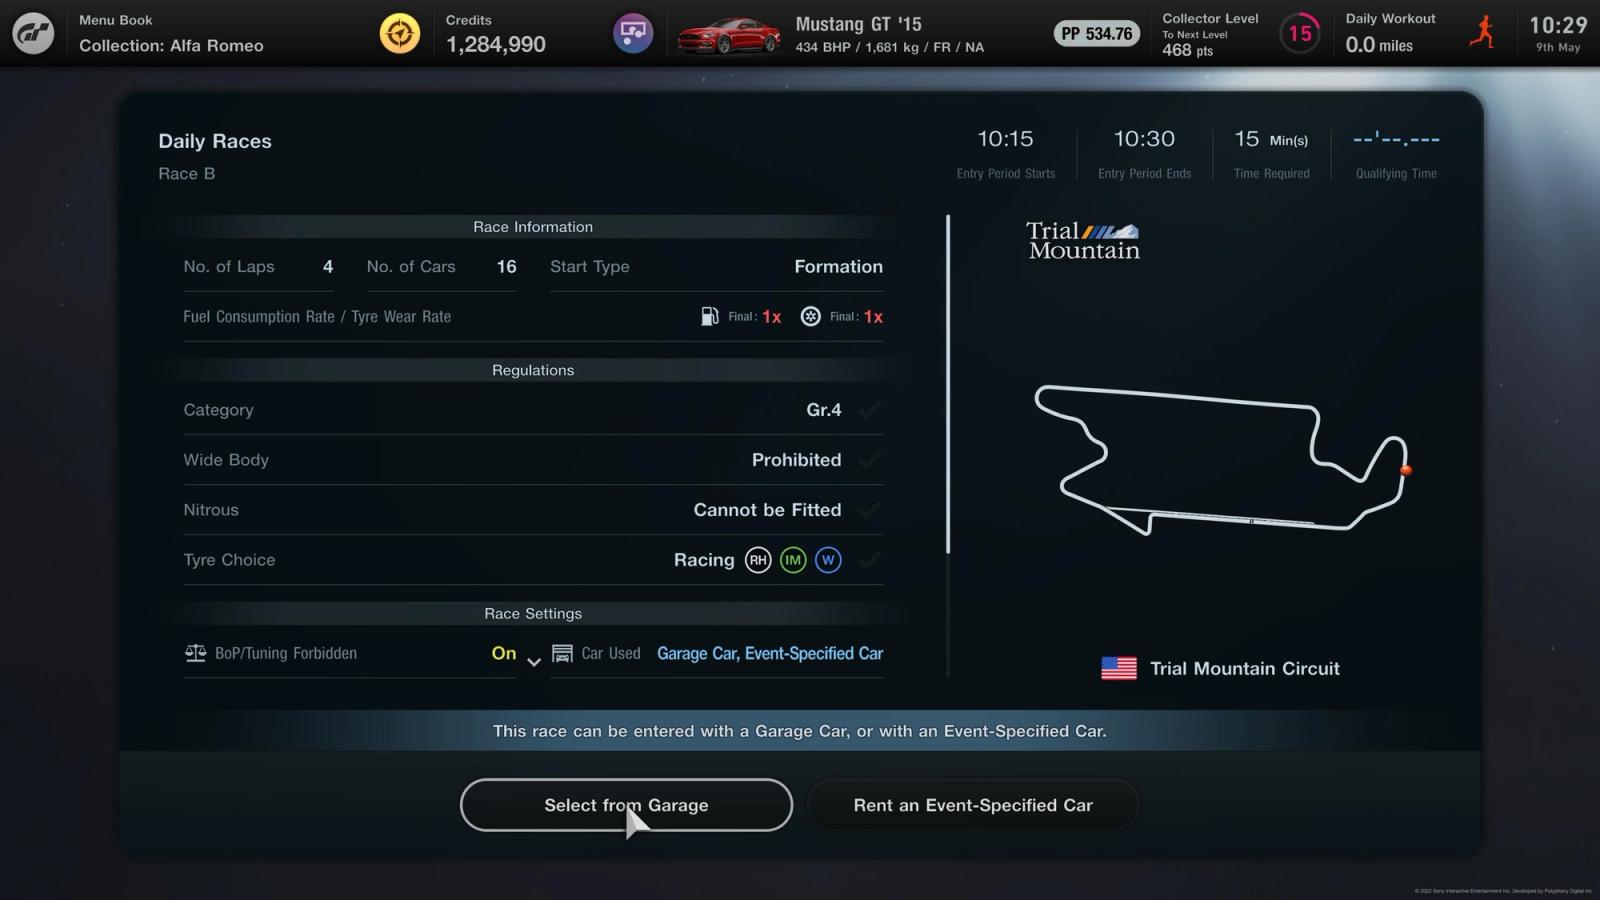 All the details of Daily Race B on Gran Turismo 7 9 May.